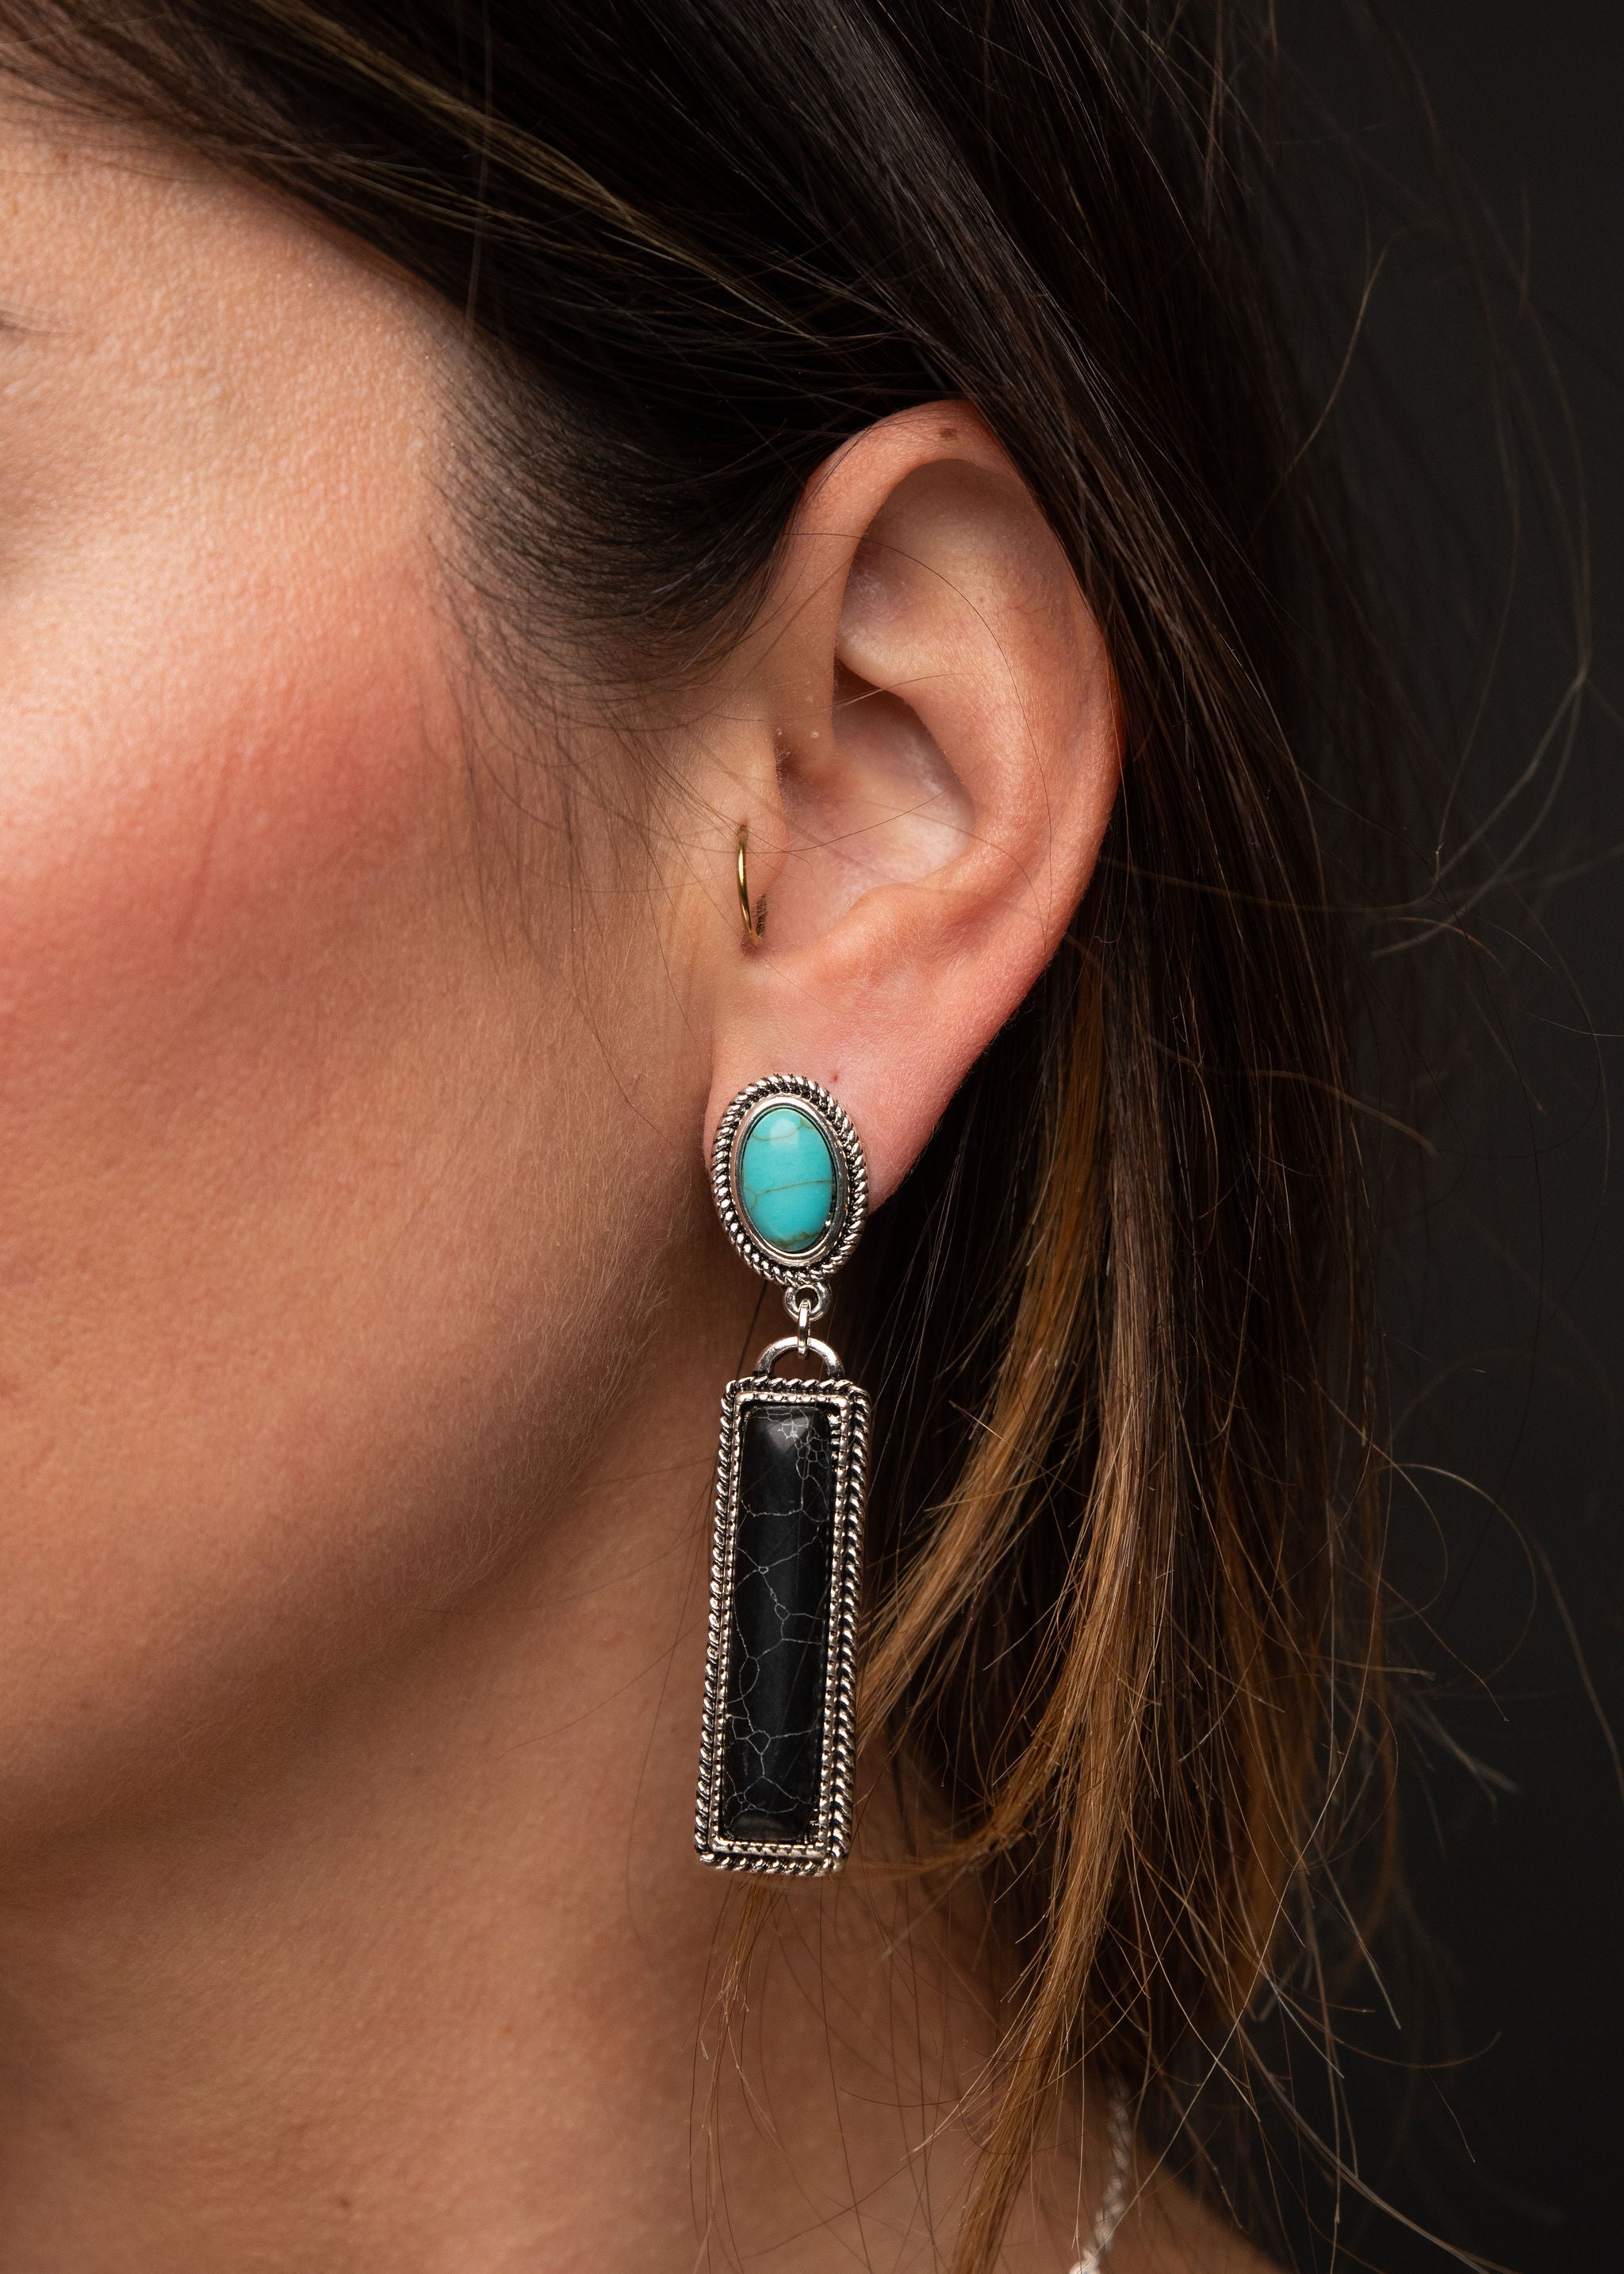 Black Bar and Turquoise Post Earring